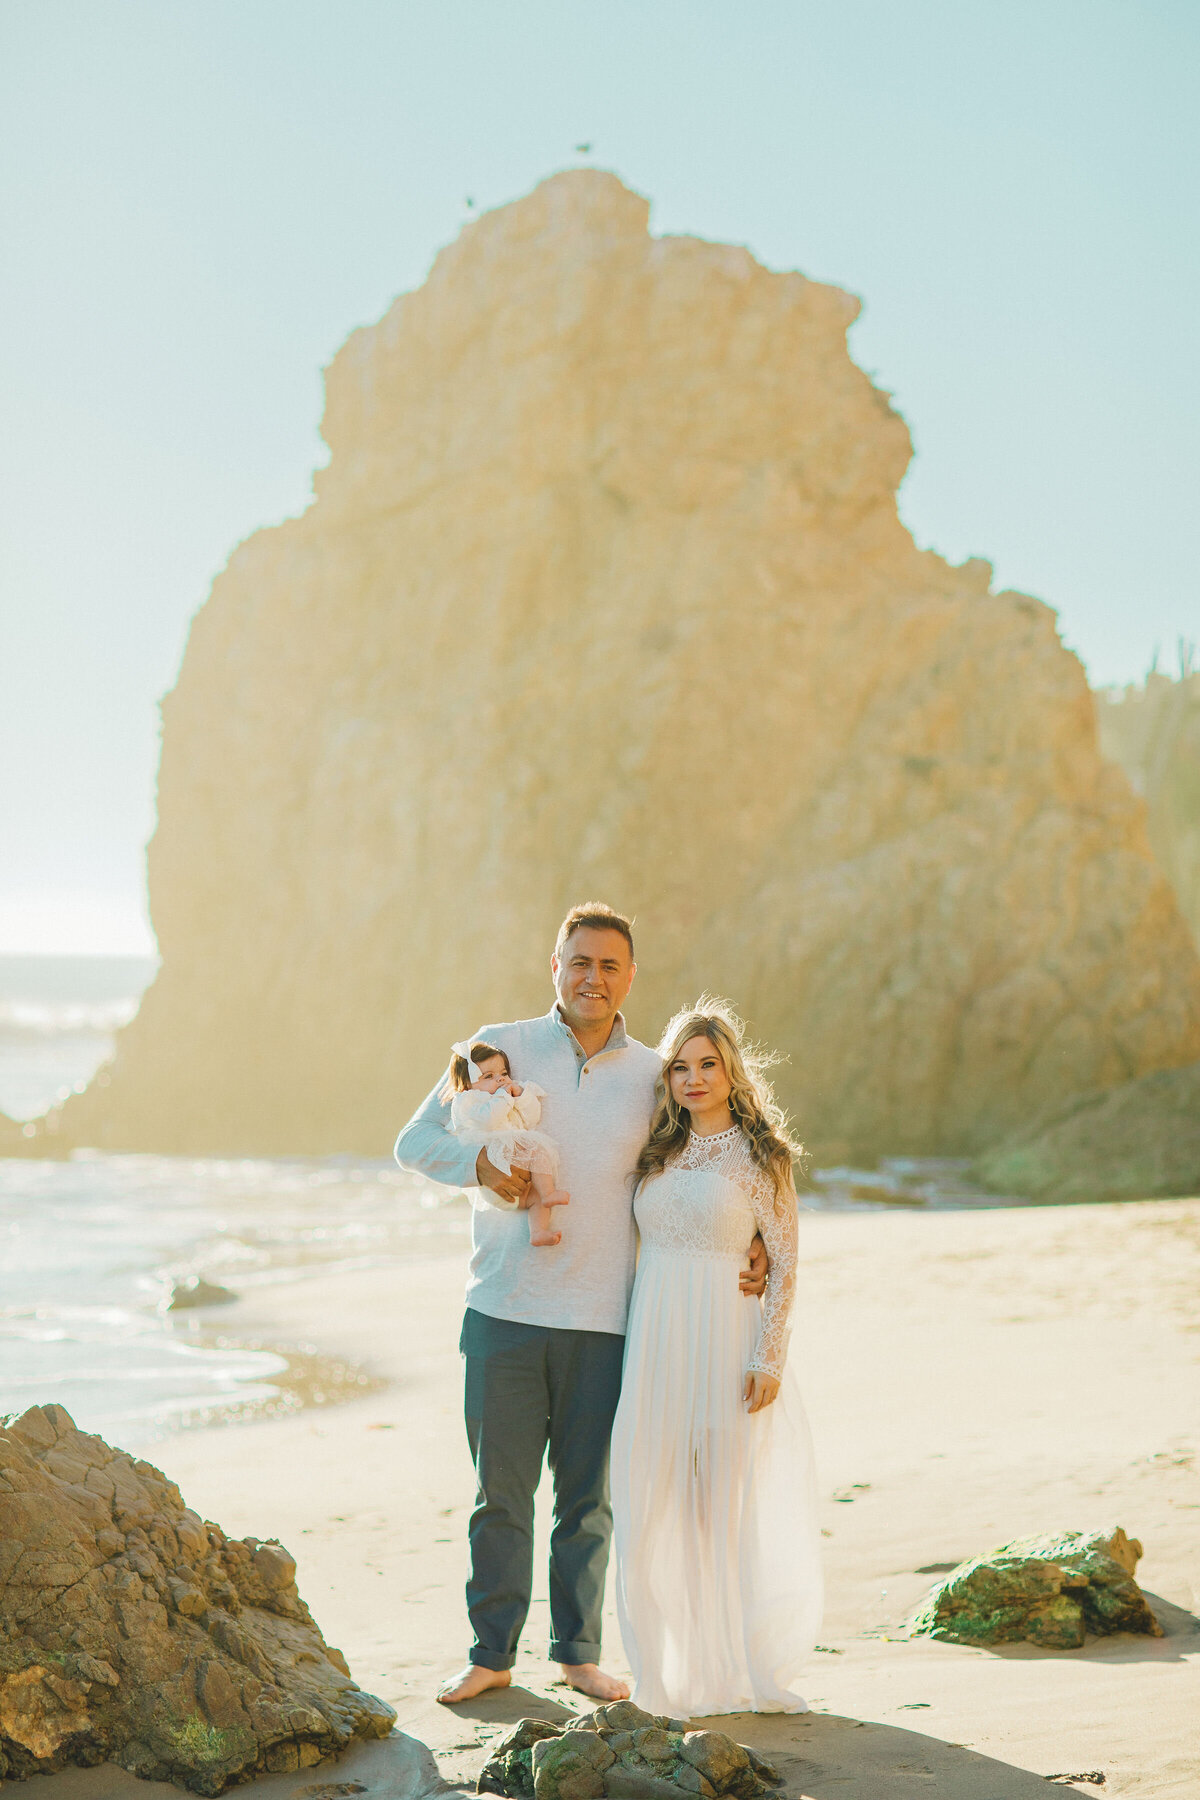 Family Portrait Photo Of Couple And Their Baby In White-themed Outfit Los Angeles